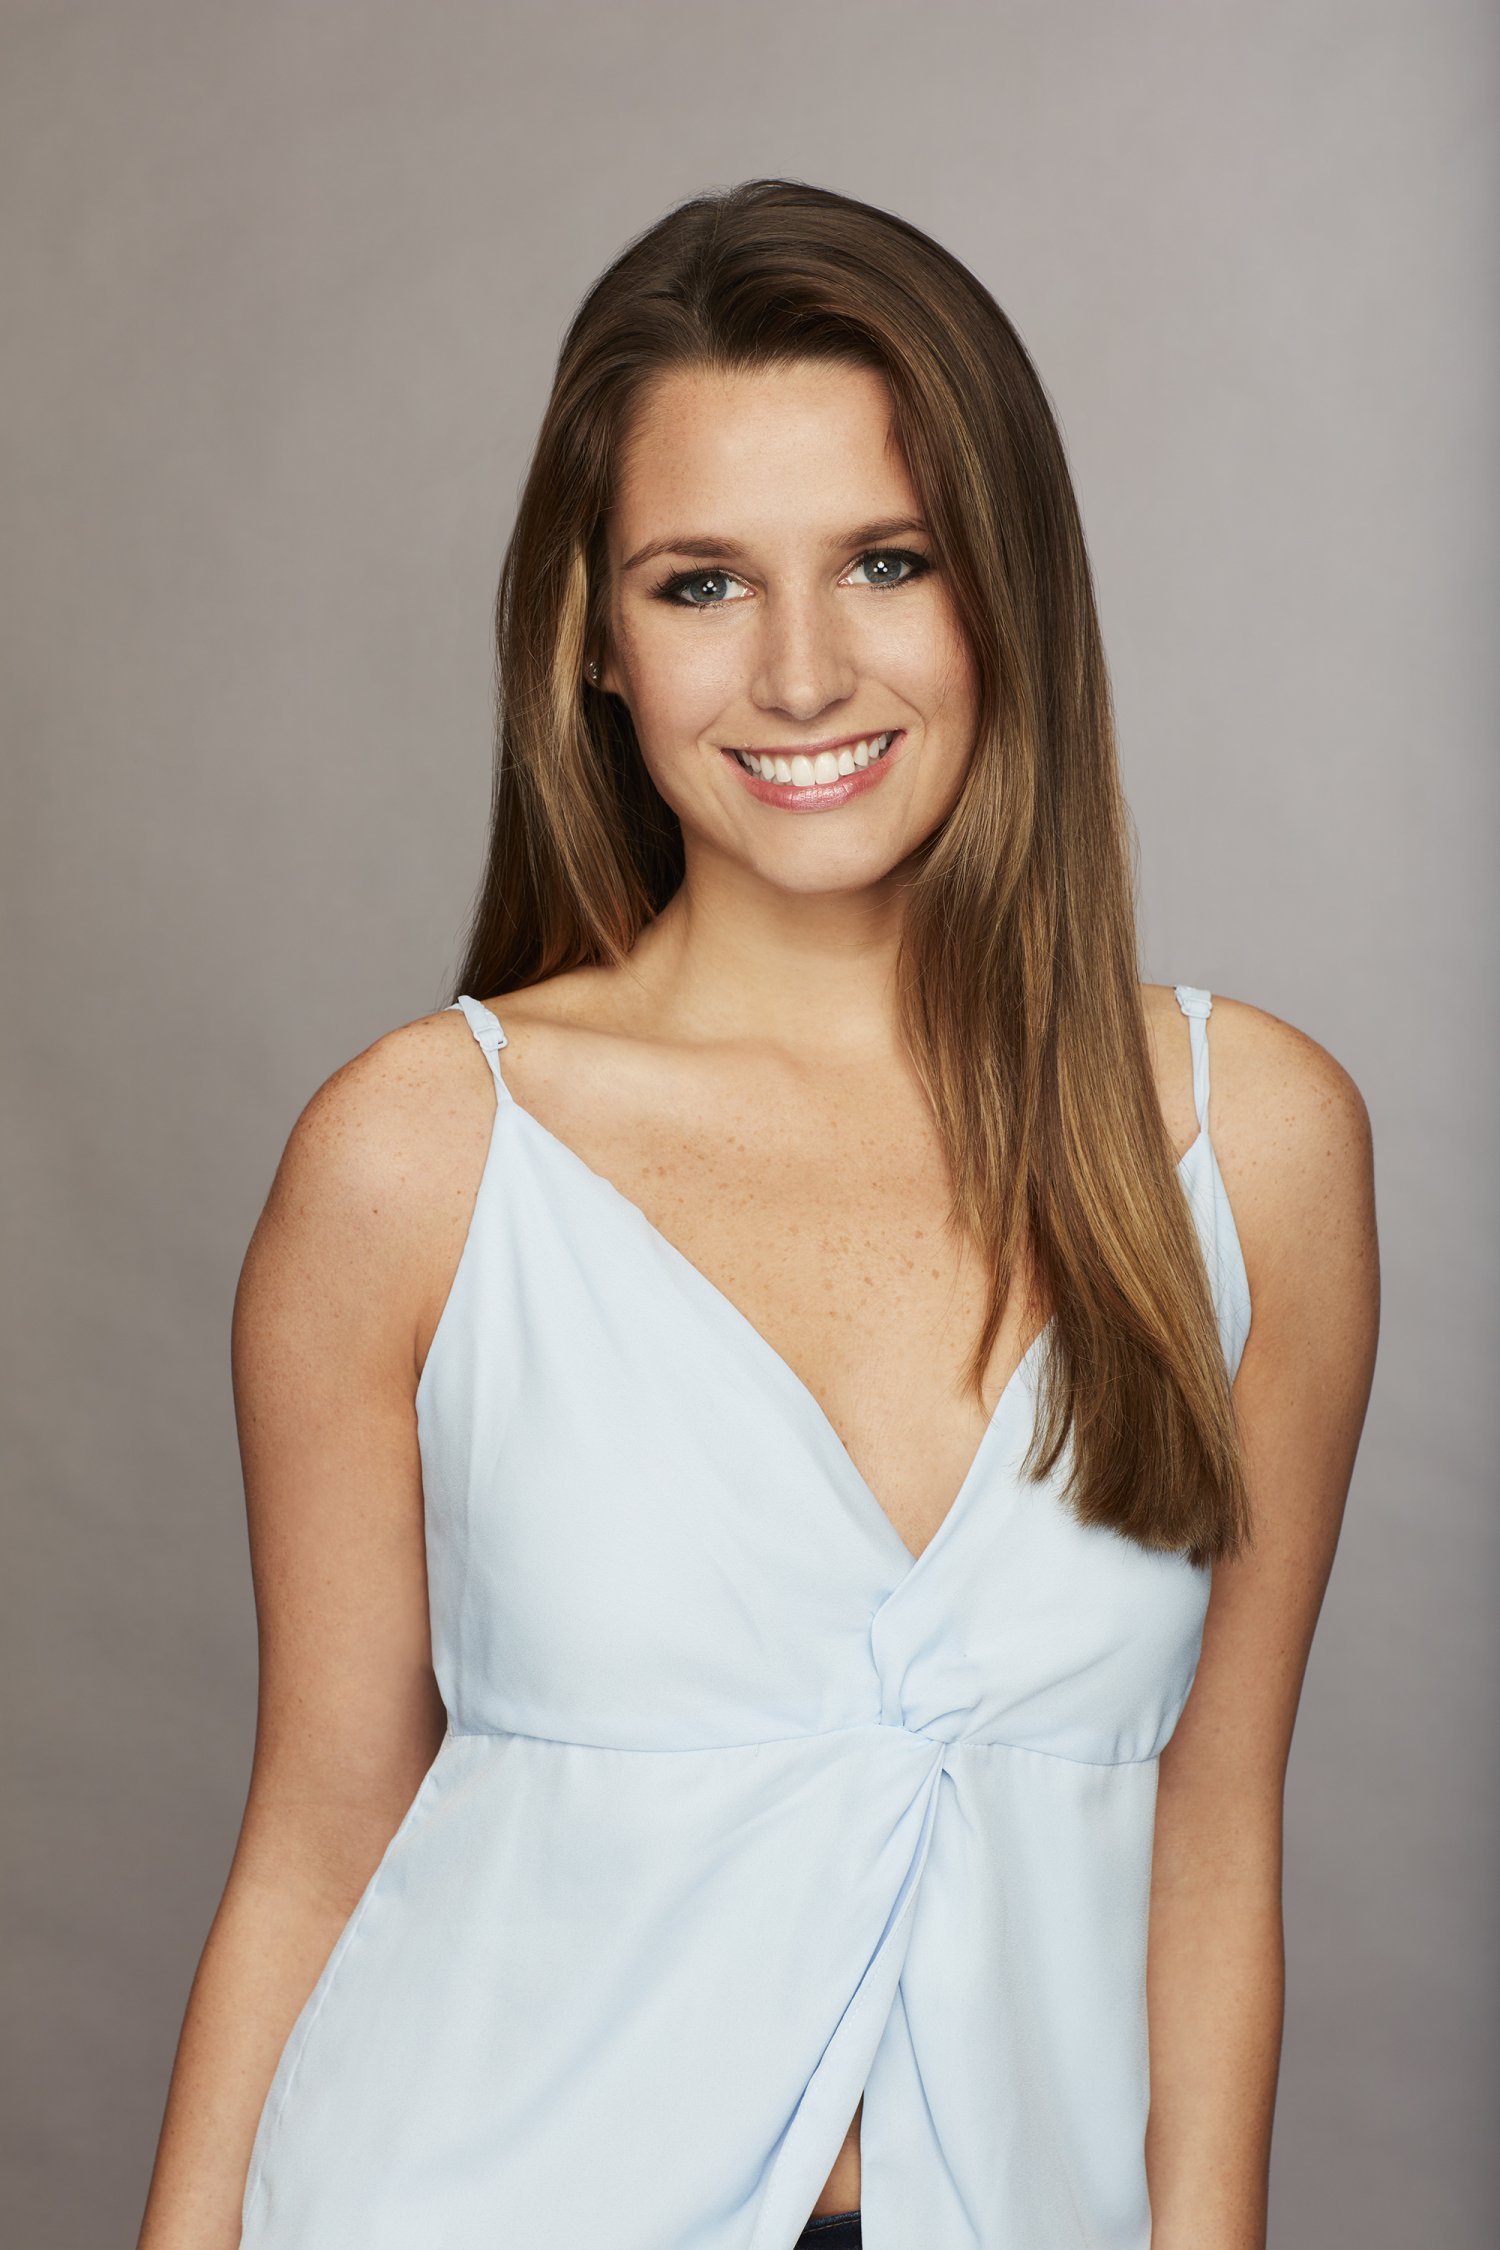 Bachelor 23 - Alex Dillon - Discussion - *Sleuthing Spoilers* 4853-o